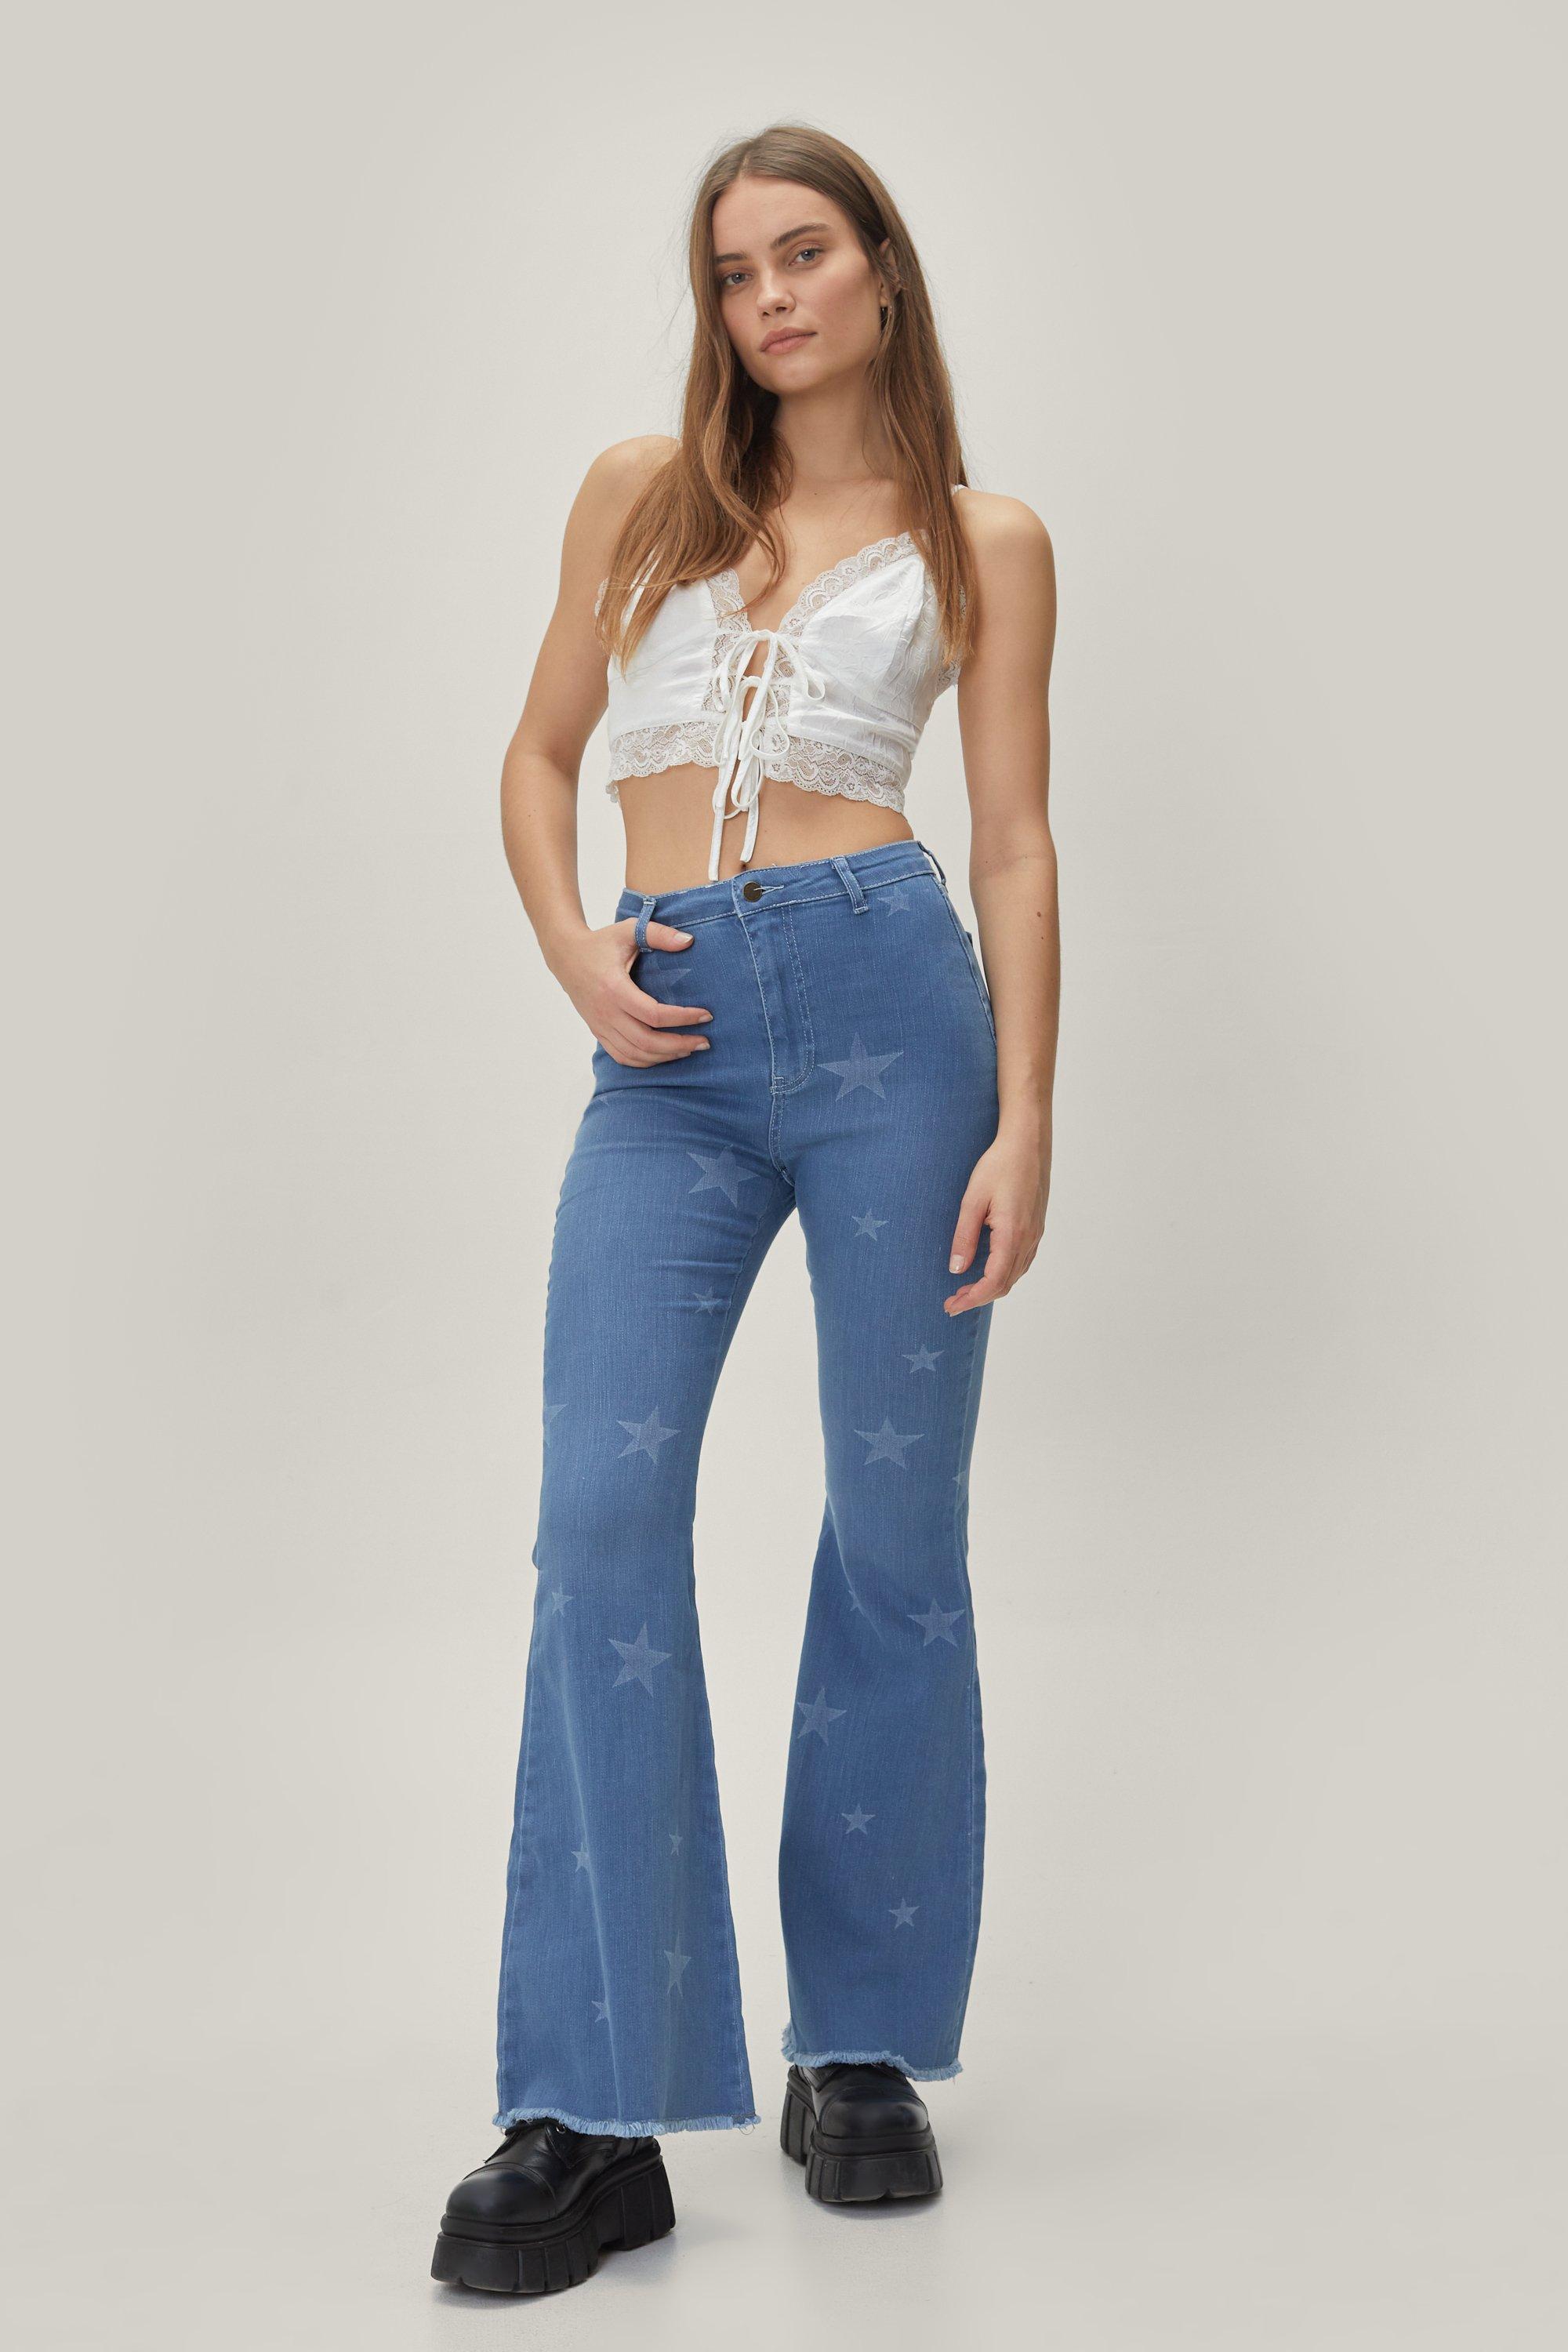 white star flare jeans